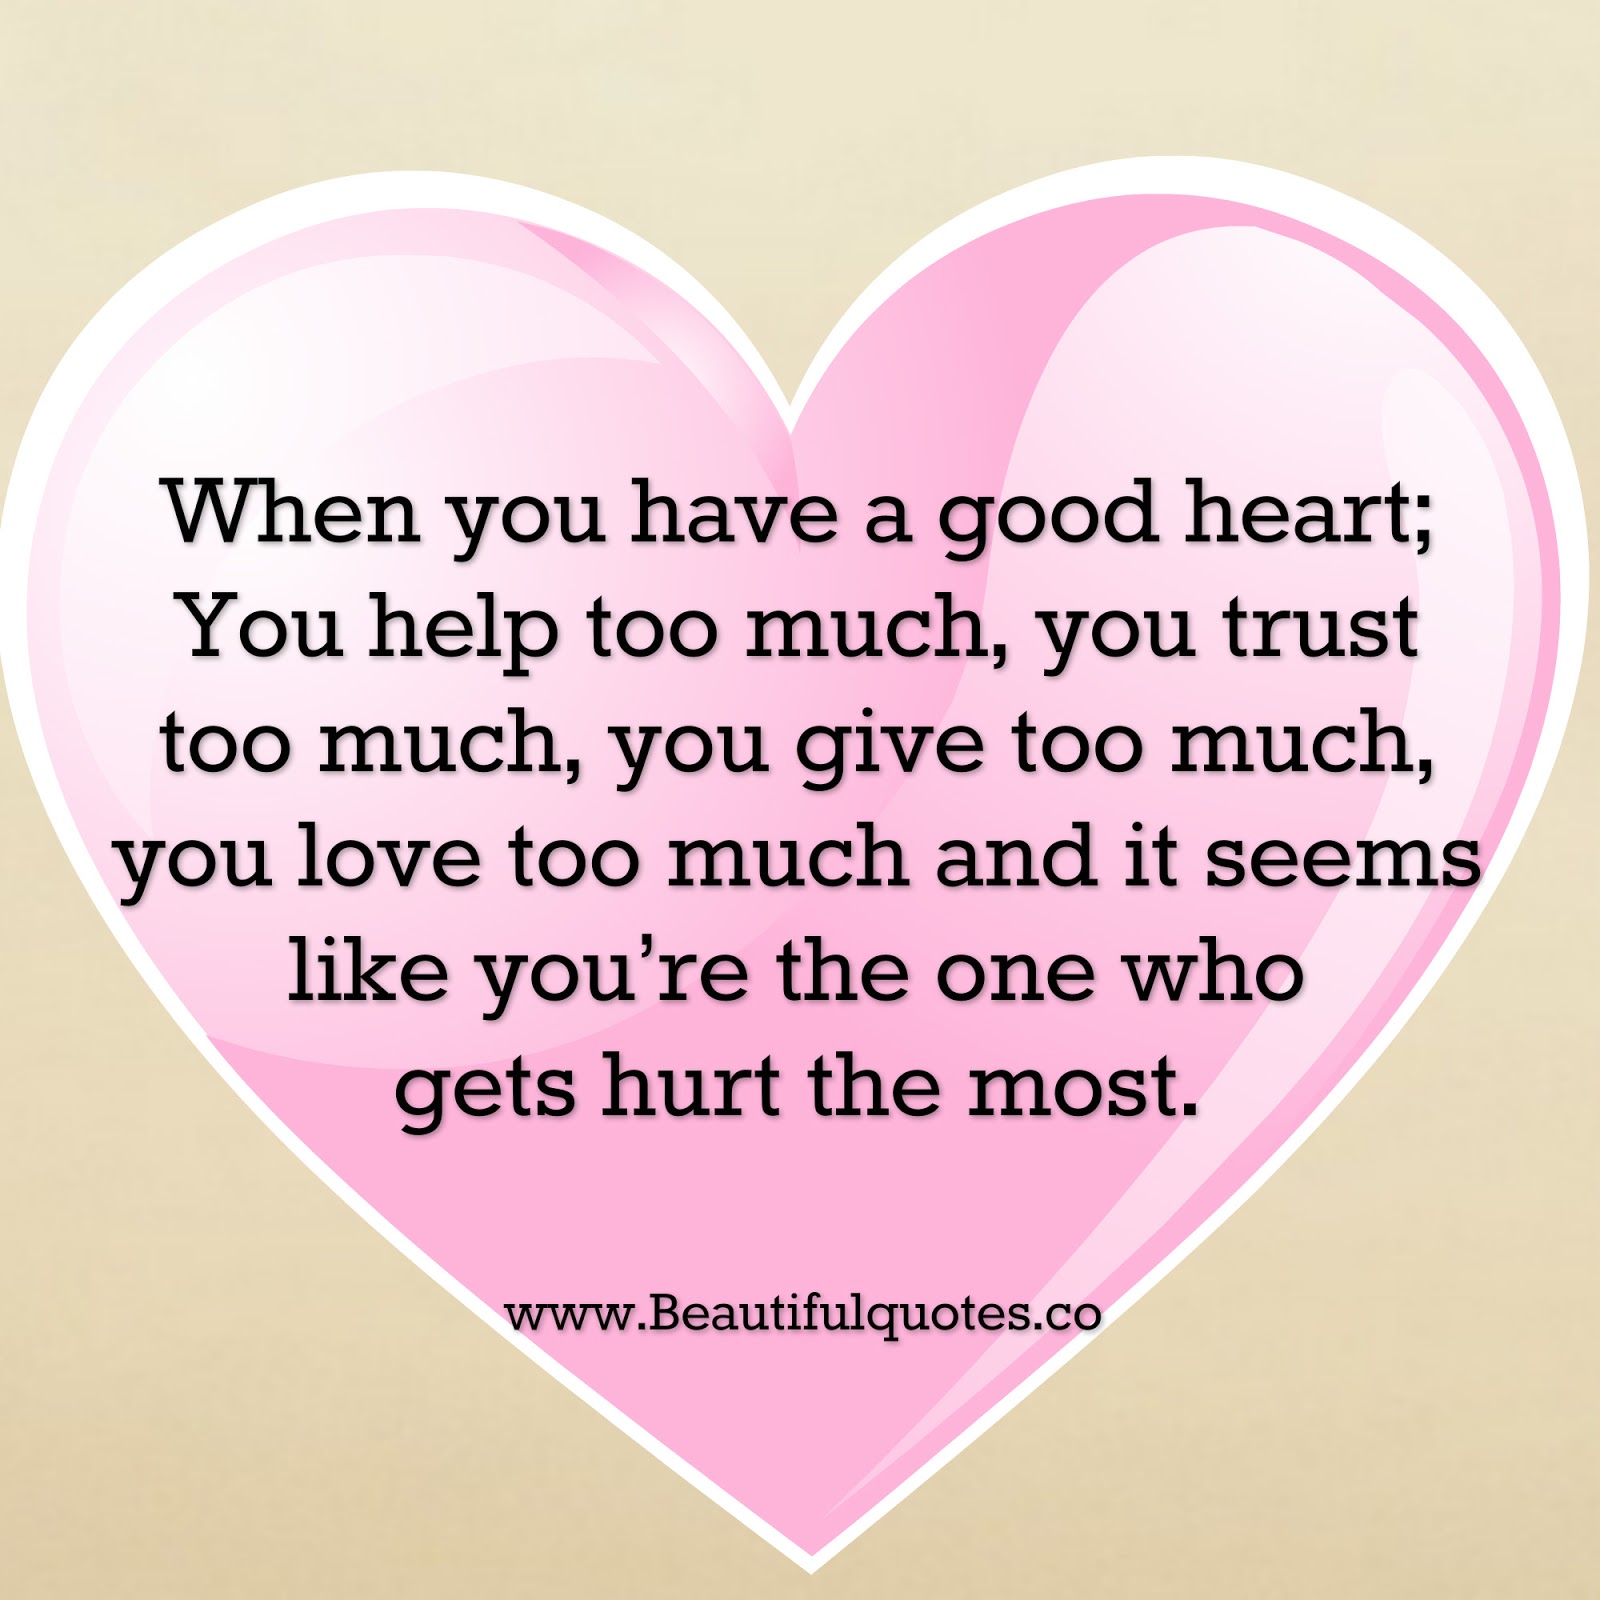 Beautiful Quotes When you have a good heart